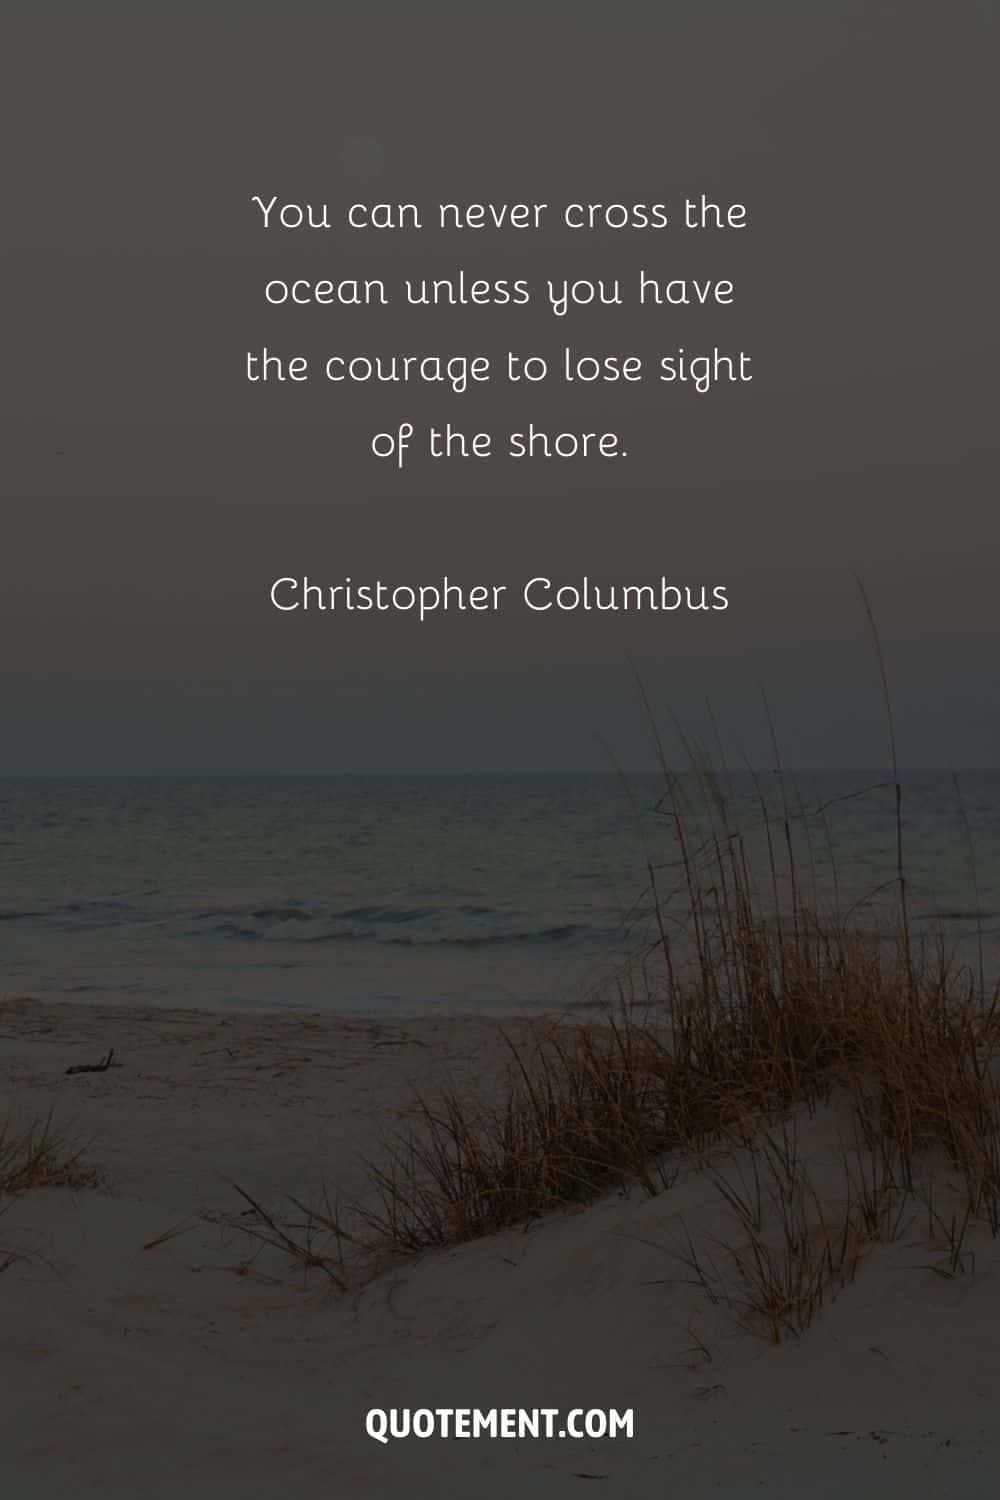 You can never cross the ocean unless you have the courage to lose sight of the shore. — Christopher Columbus